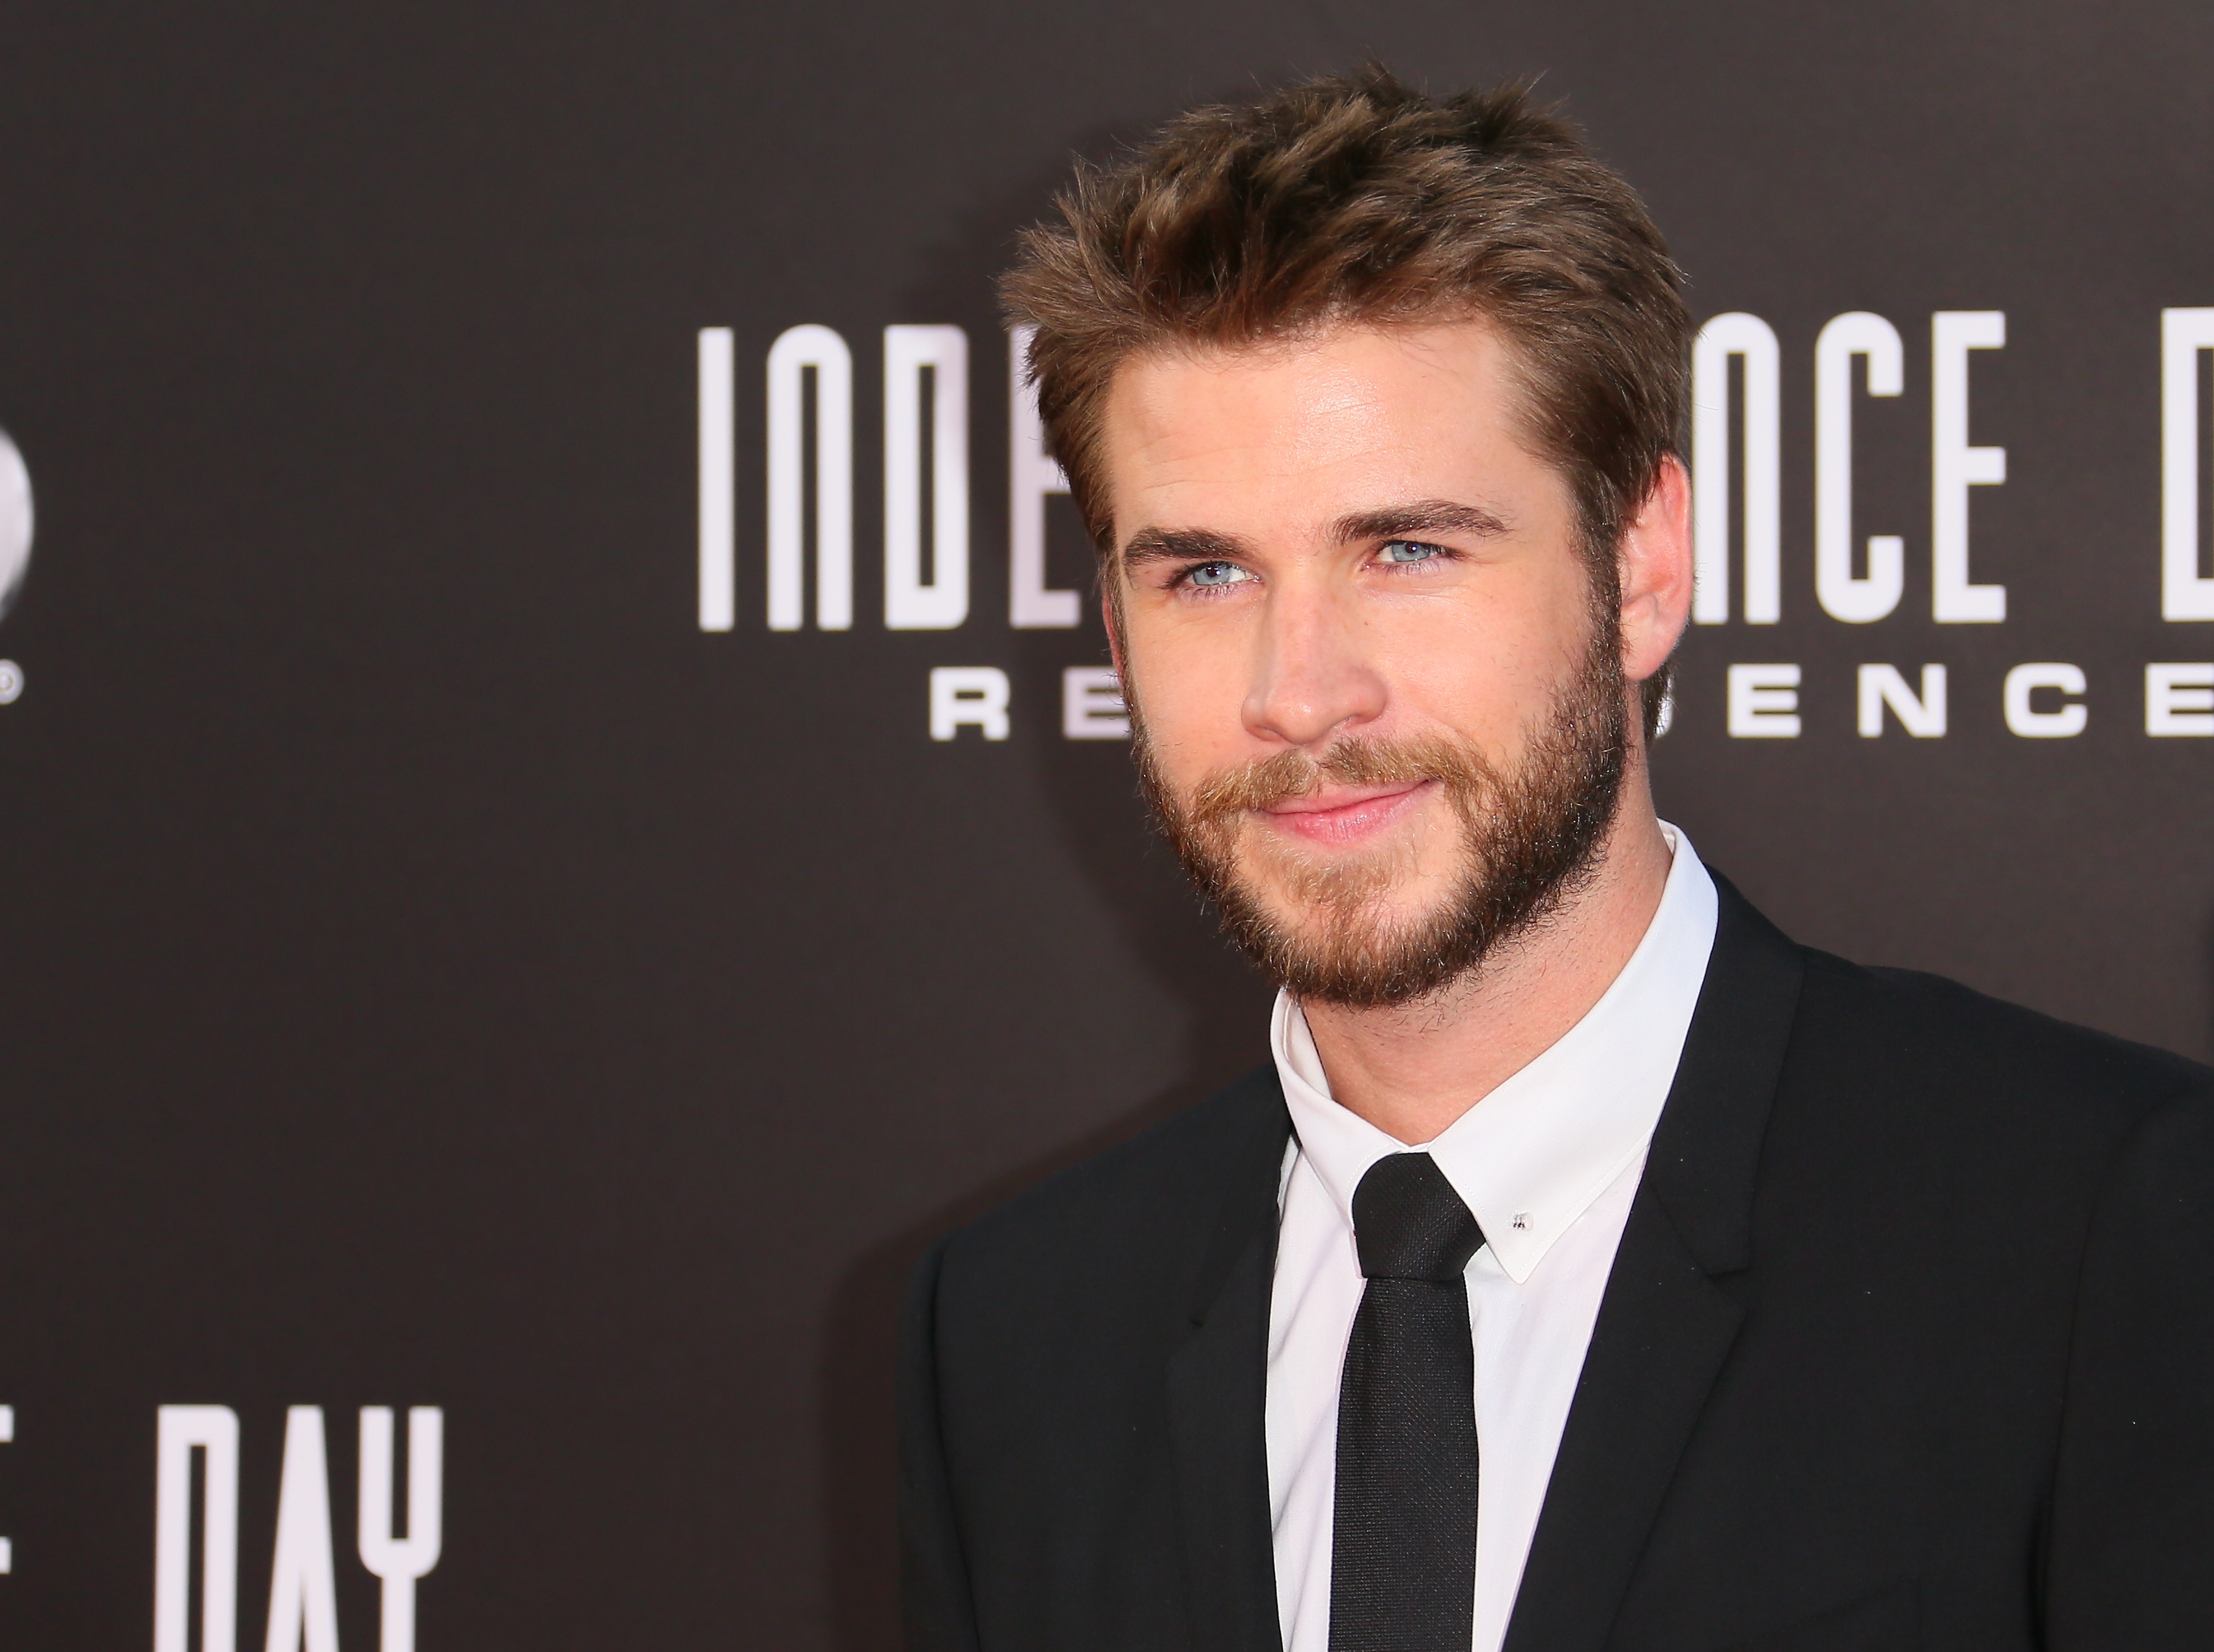 Liam Hemsworth at TCL Chinese Theatre on June 20, 2016, in Hollywood, California. | Source: Getty Images